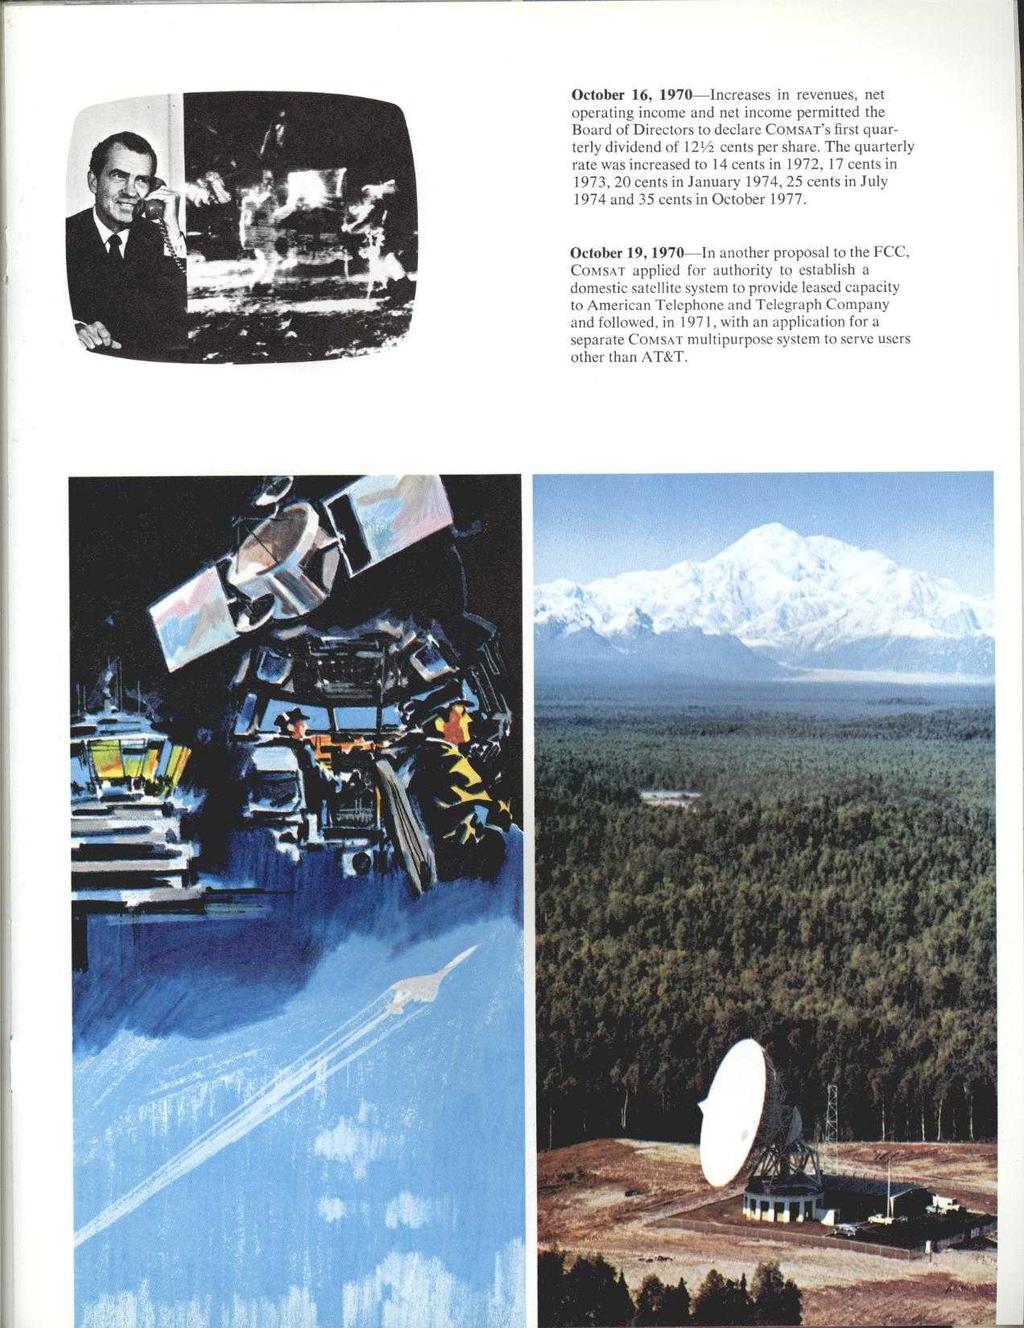 October 16, 1970-Increases in revenues, net operating income and net income permitted the Board of Directors to declare COMSAT'S first quarterly dividend of 121/2 cents per share.